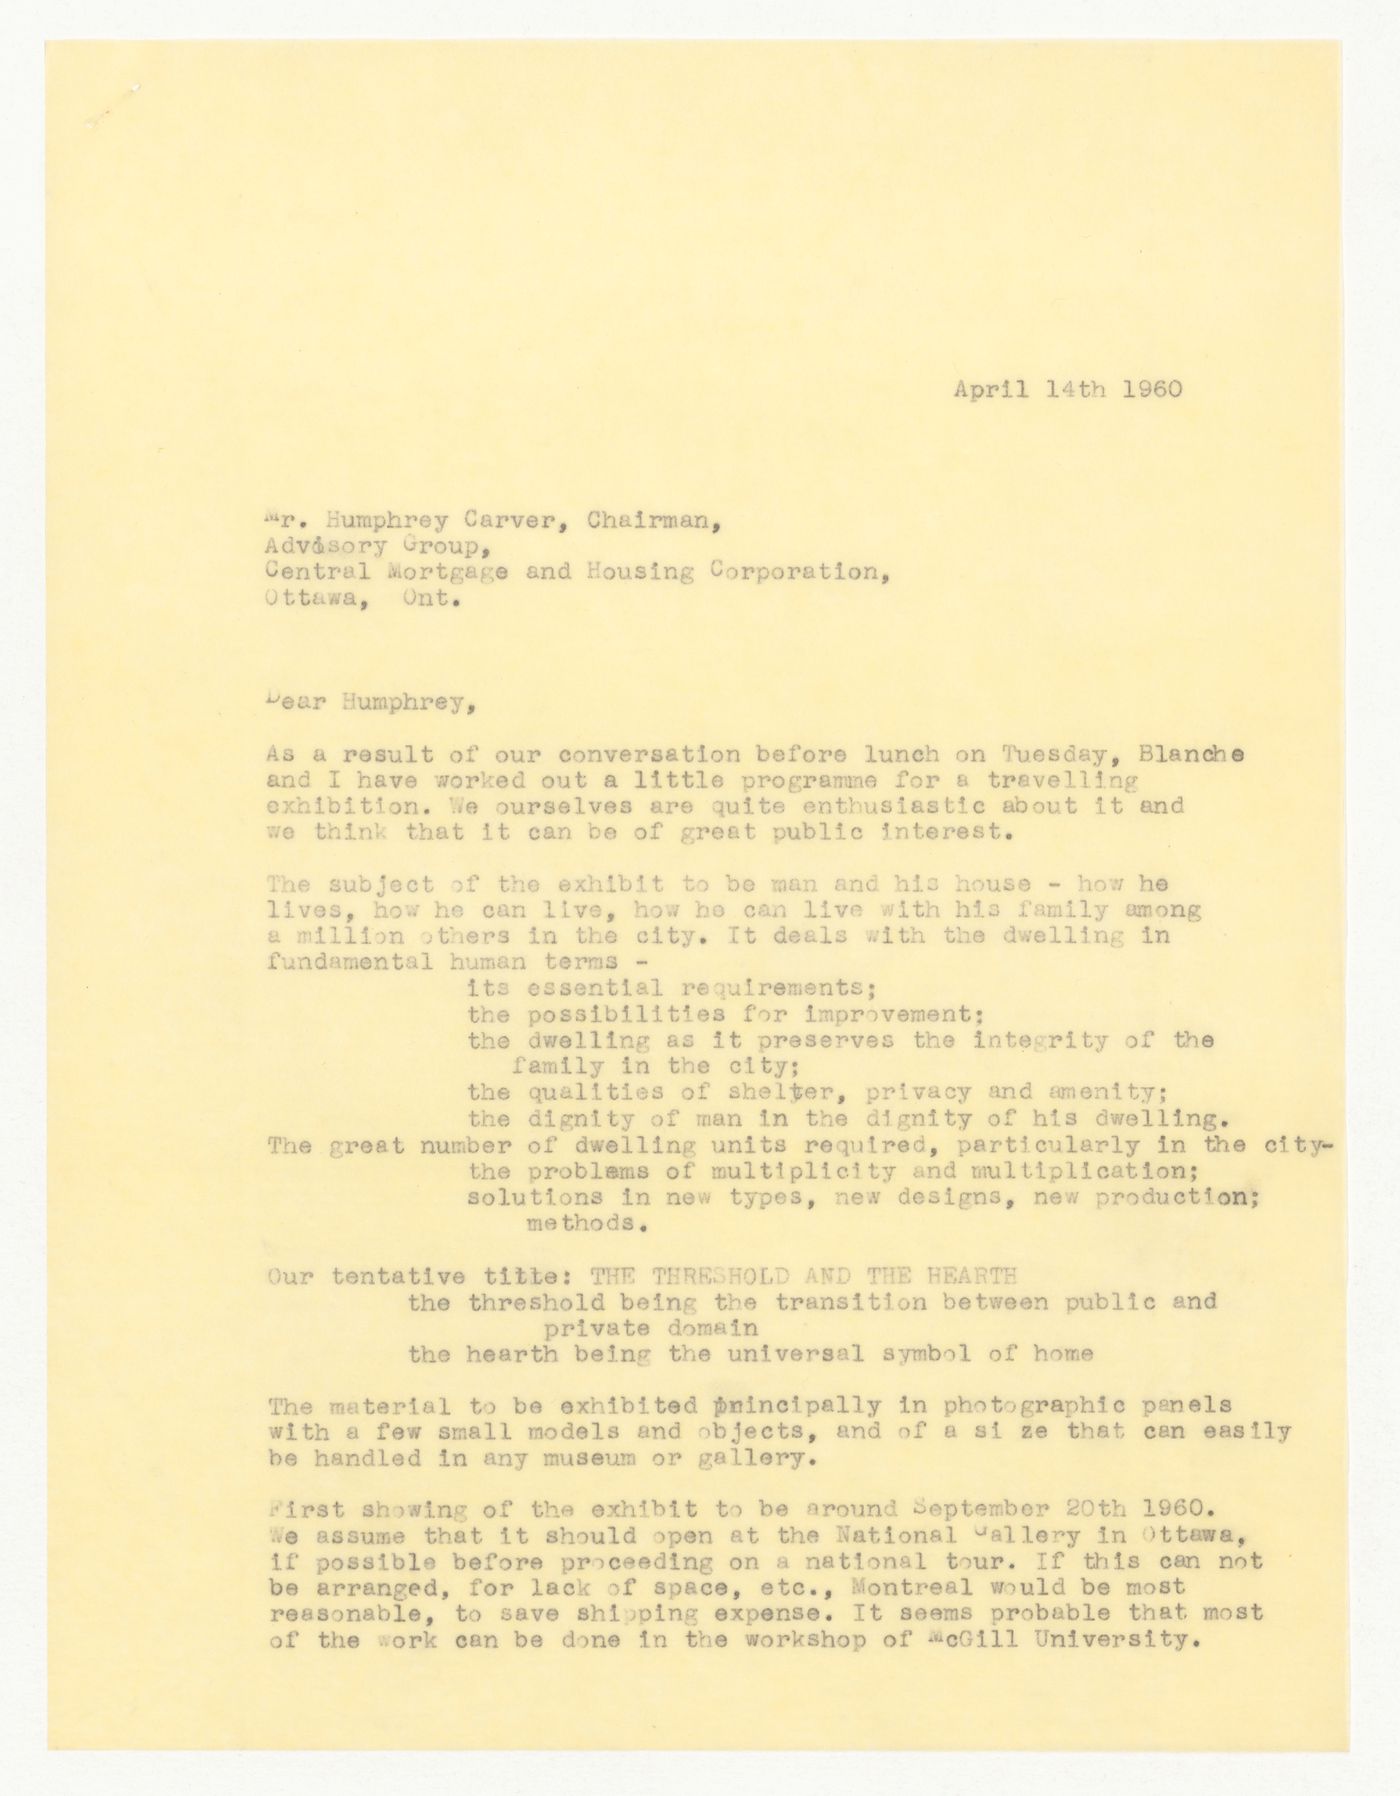 Letter from H. P. Daniel van Ginkel to Humphrey Carver for CMHC Exhibition